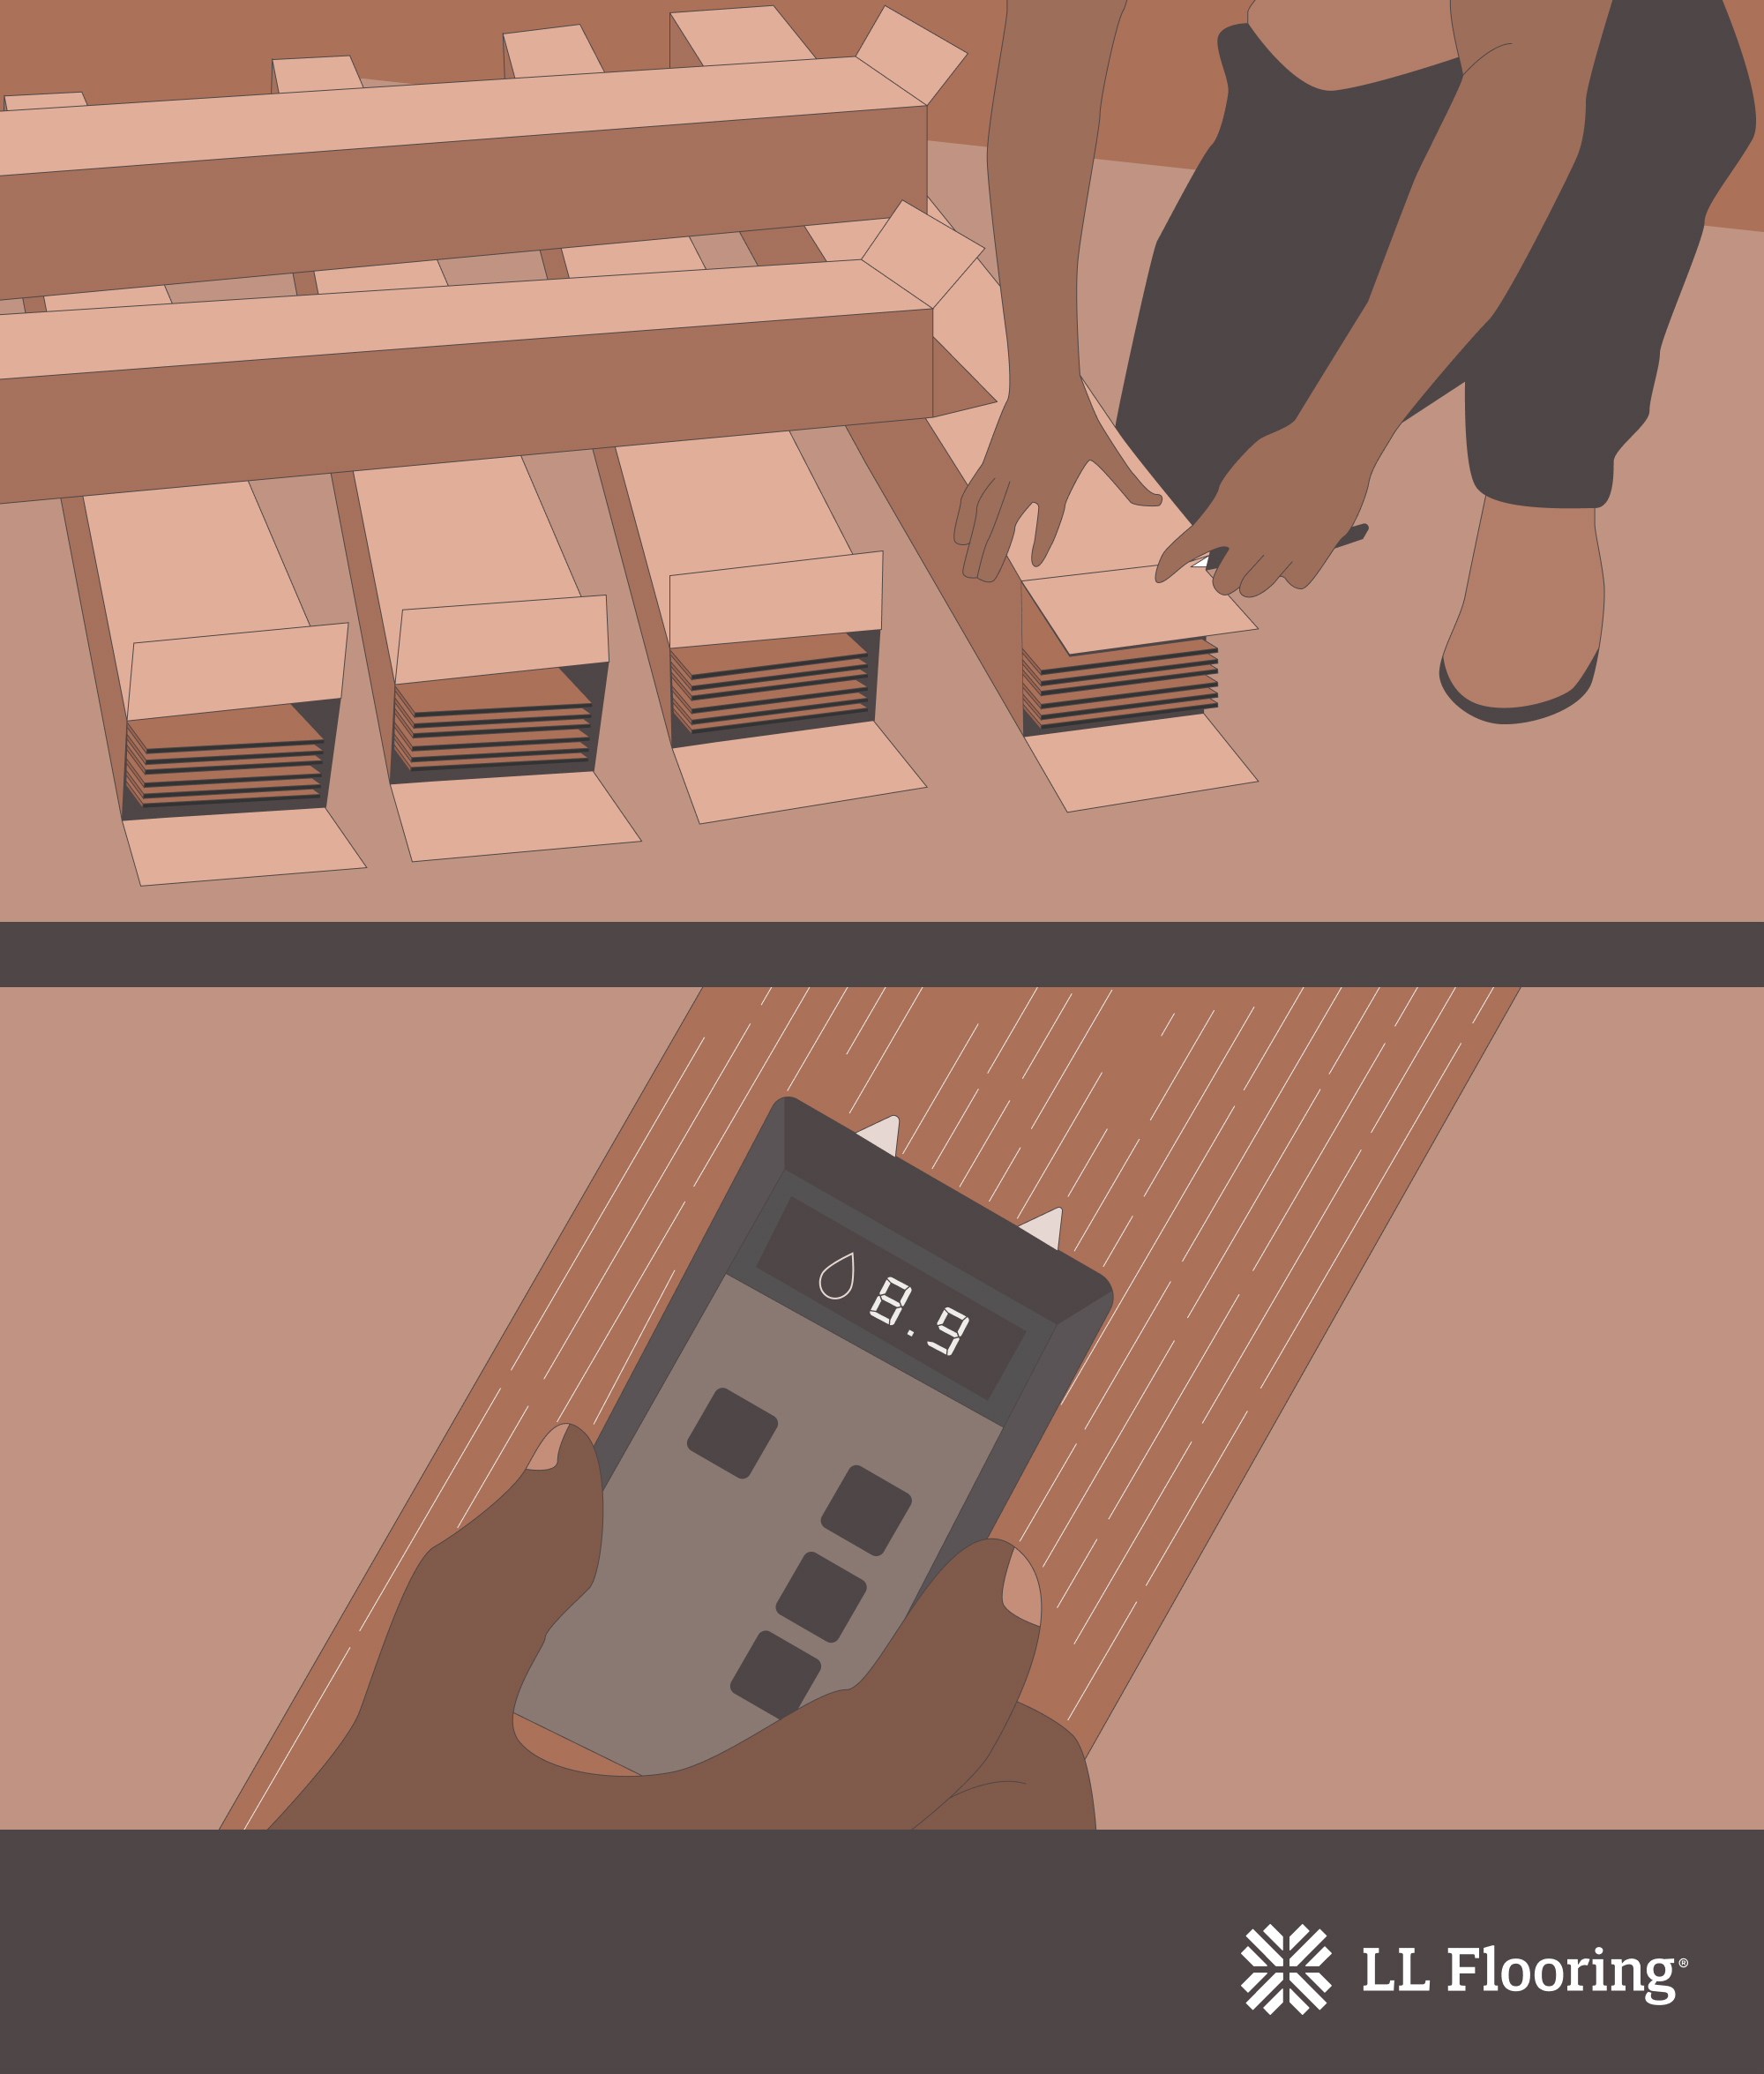 graphic showing acclimating floors in boxes and moisture meter being used